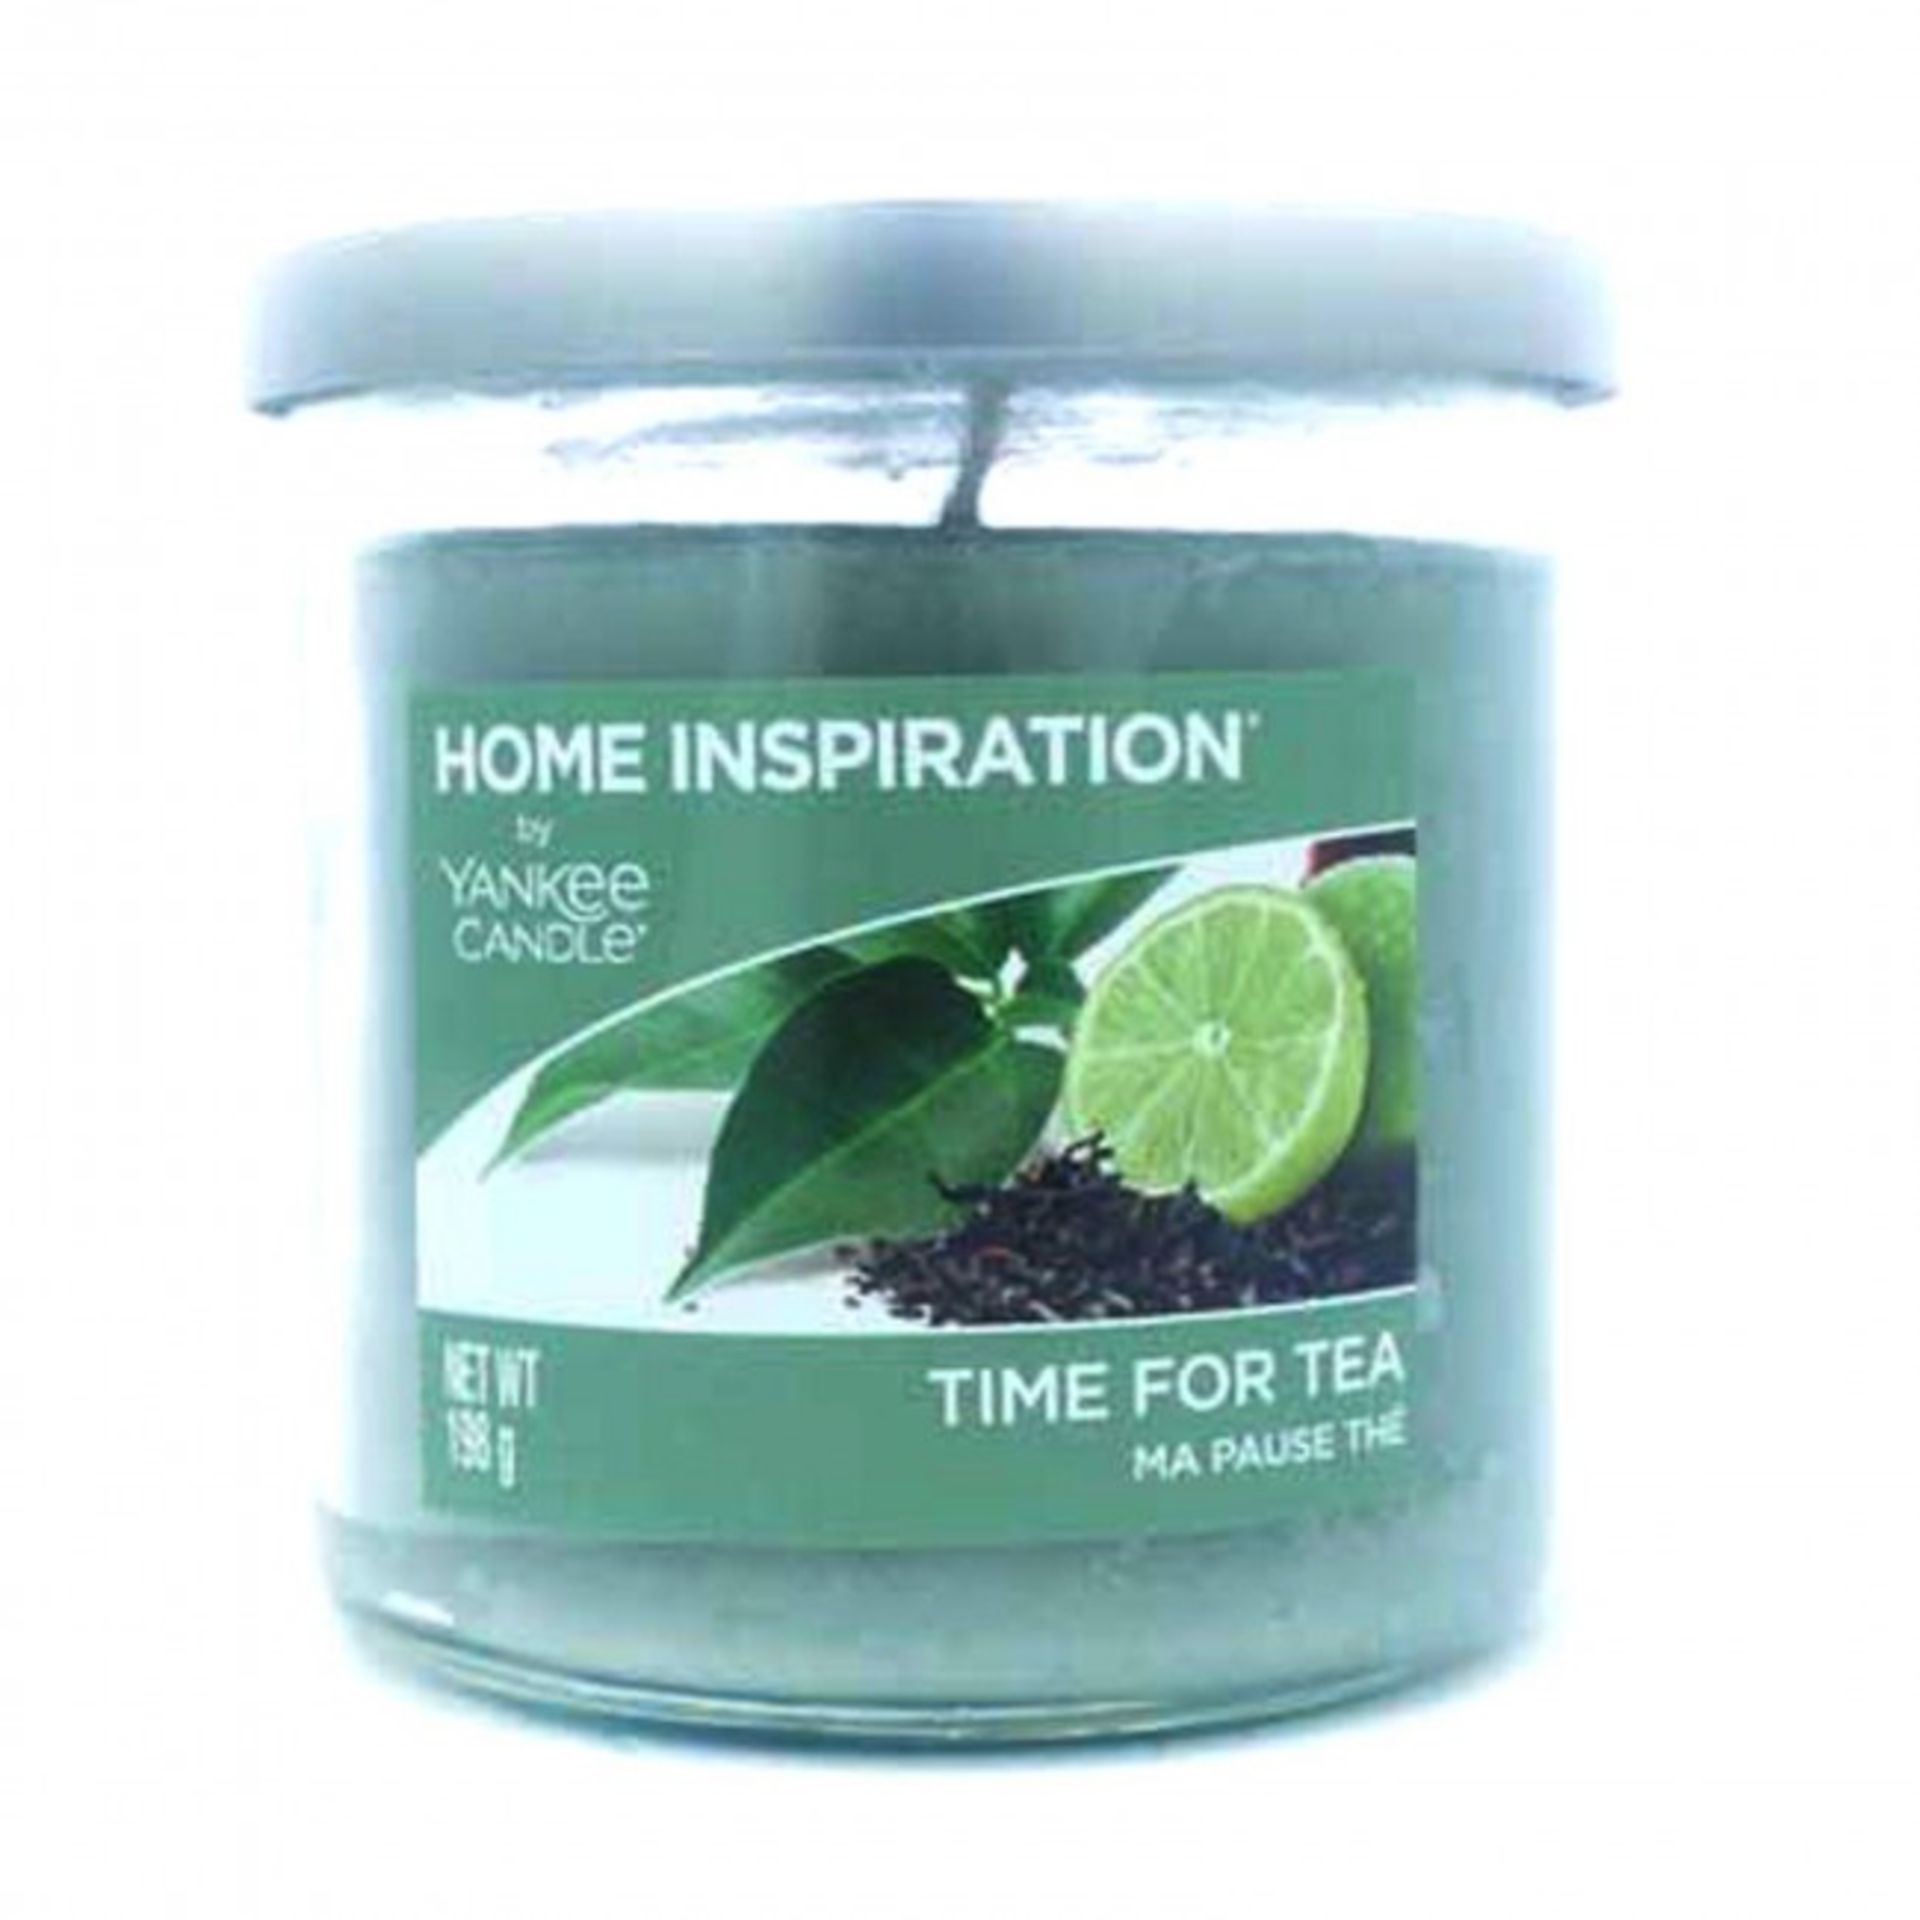 + VAT Brand New Home Inspiration by Yankee Candle Time for Tea 198g Tumbler Candle - ISP Â£7.99